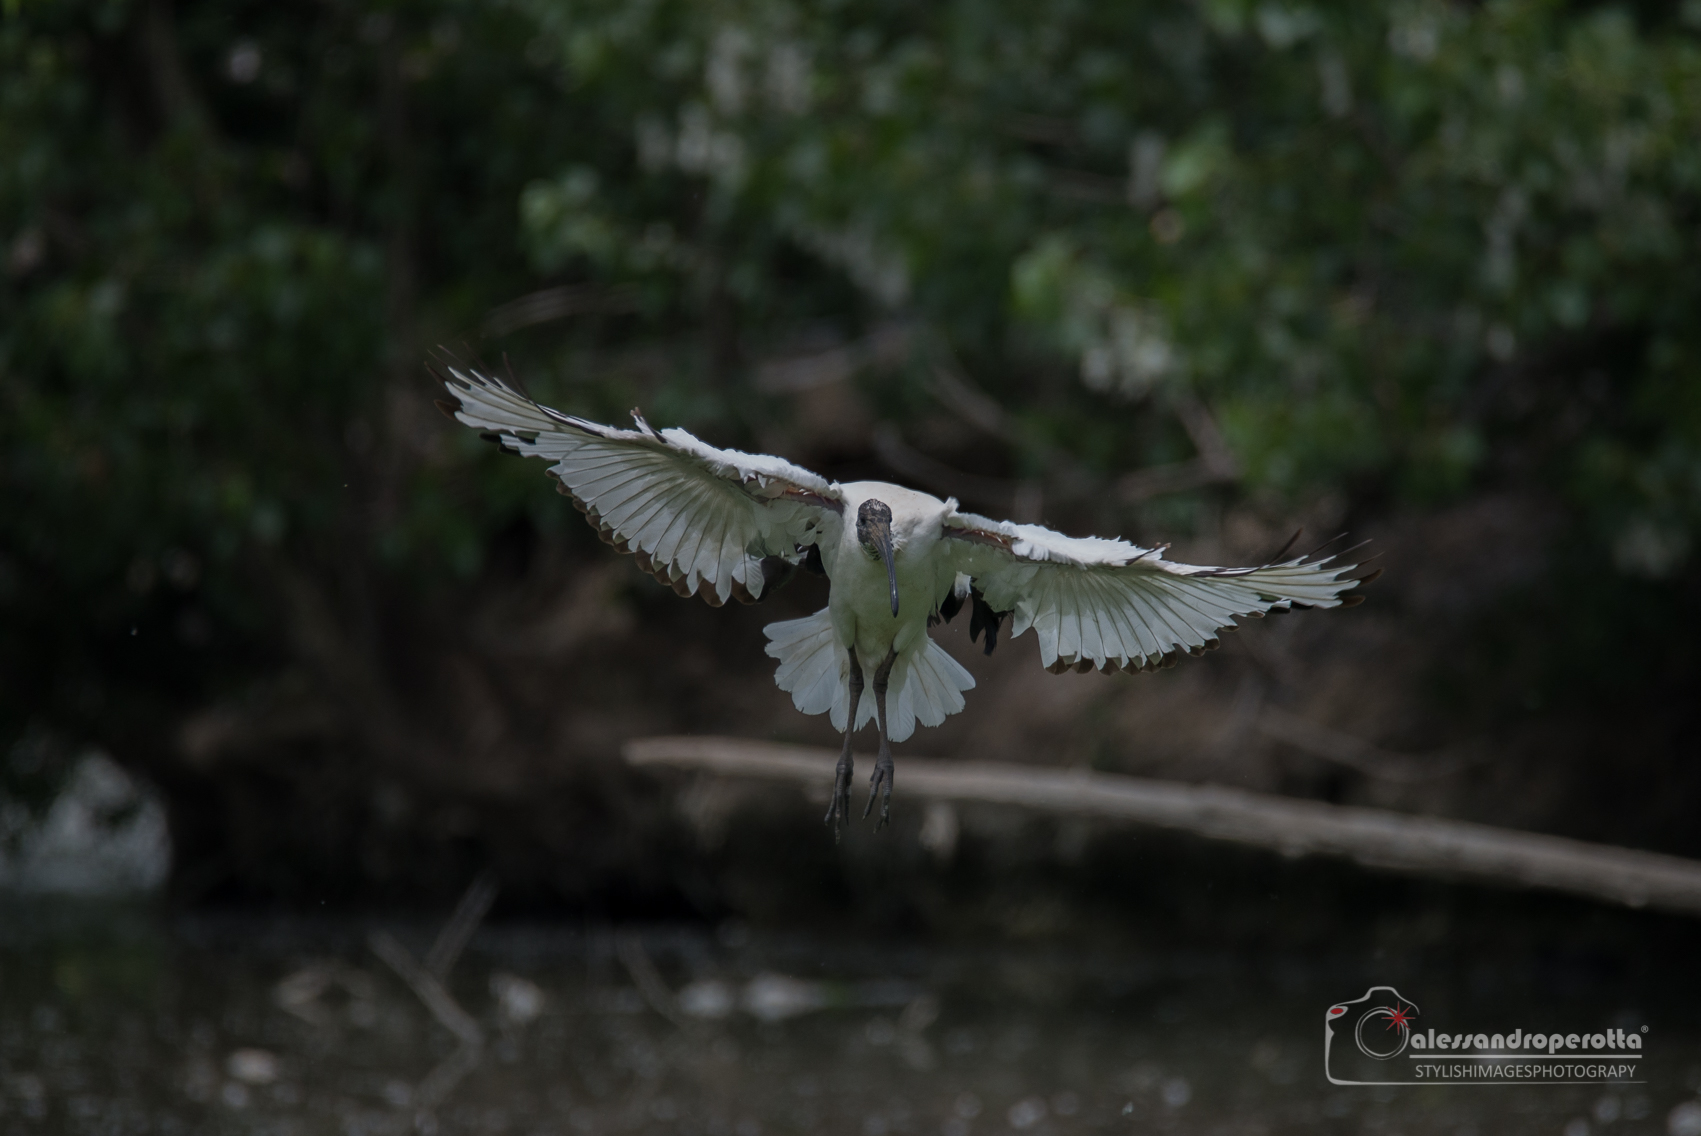 The flight of the sacred Ibis...